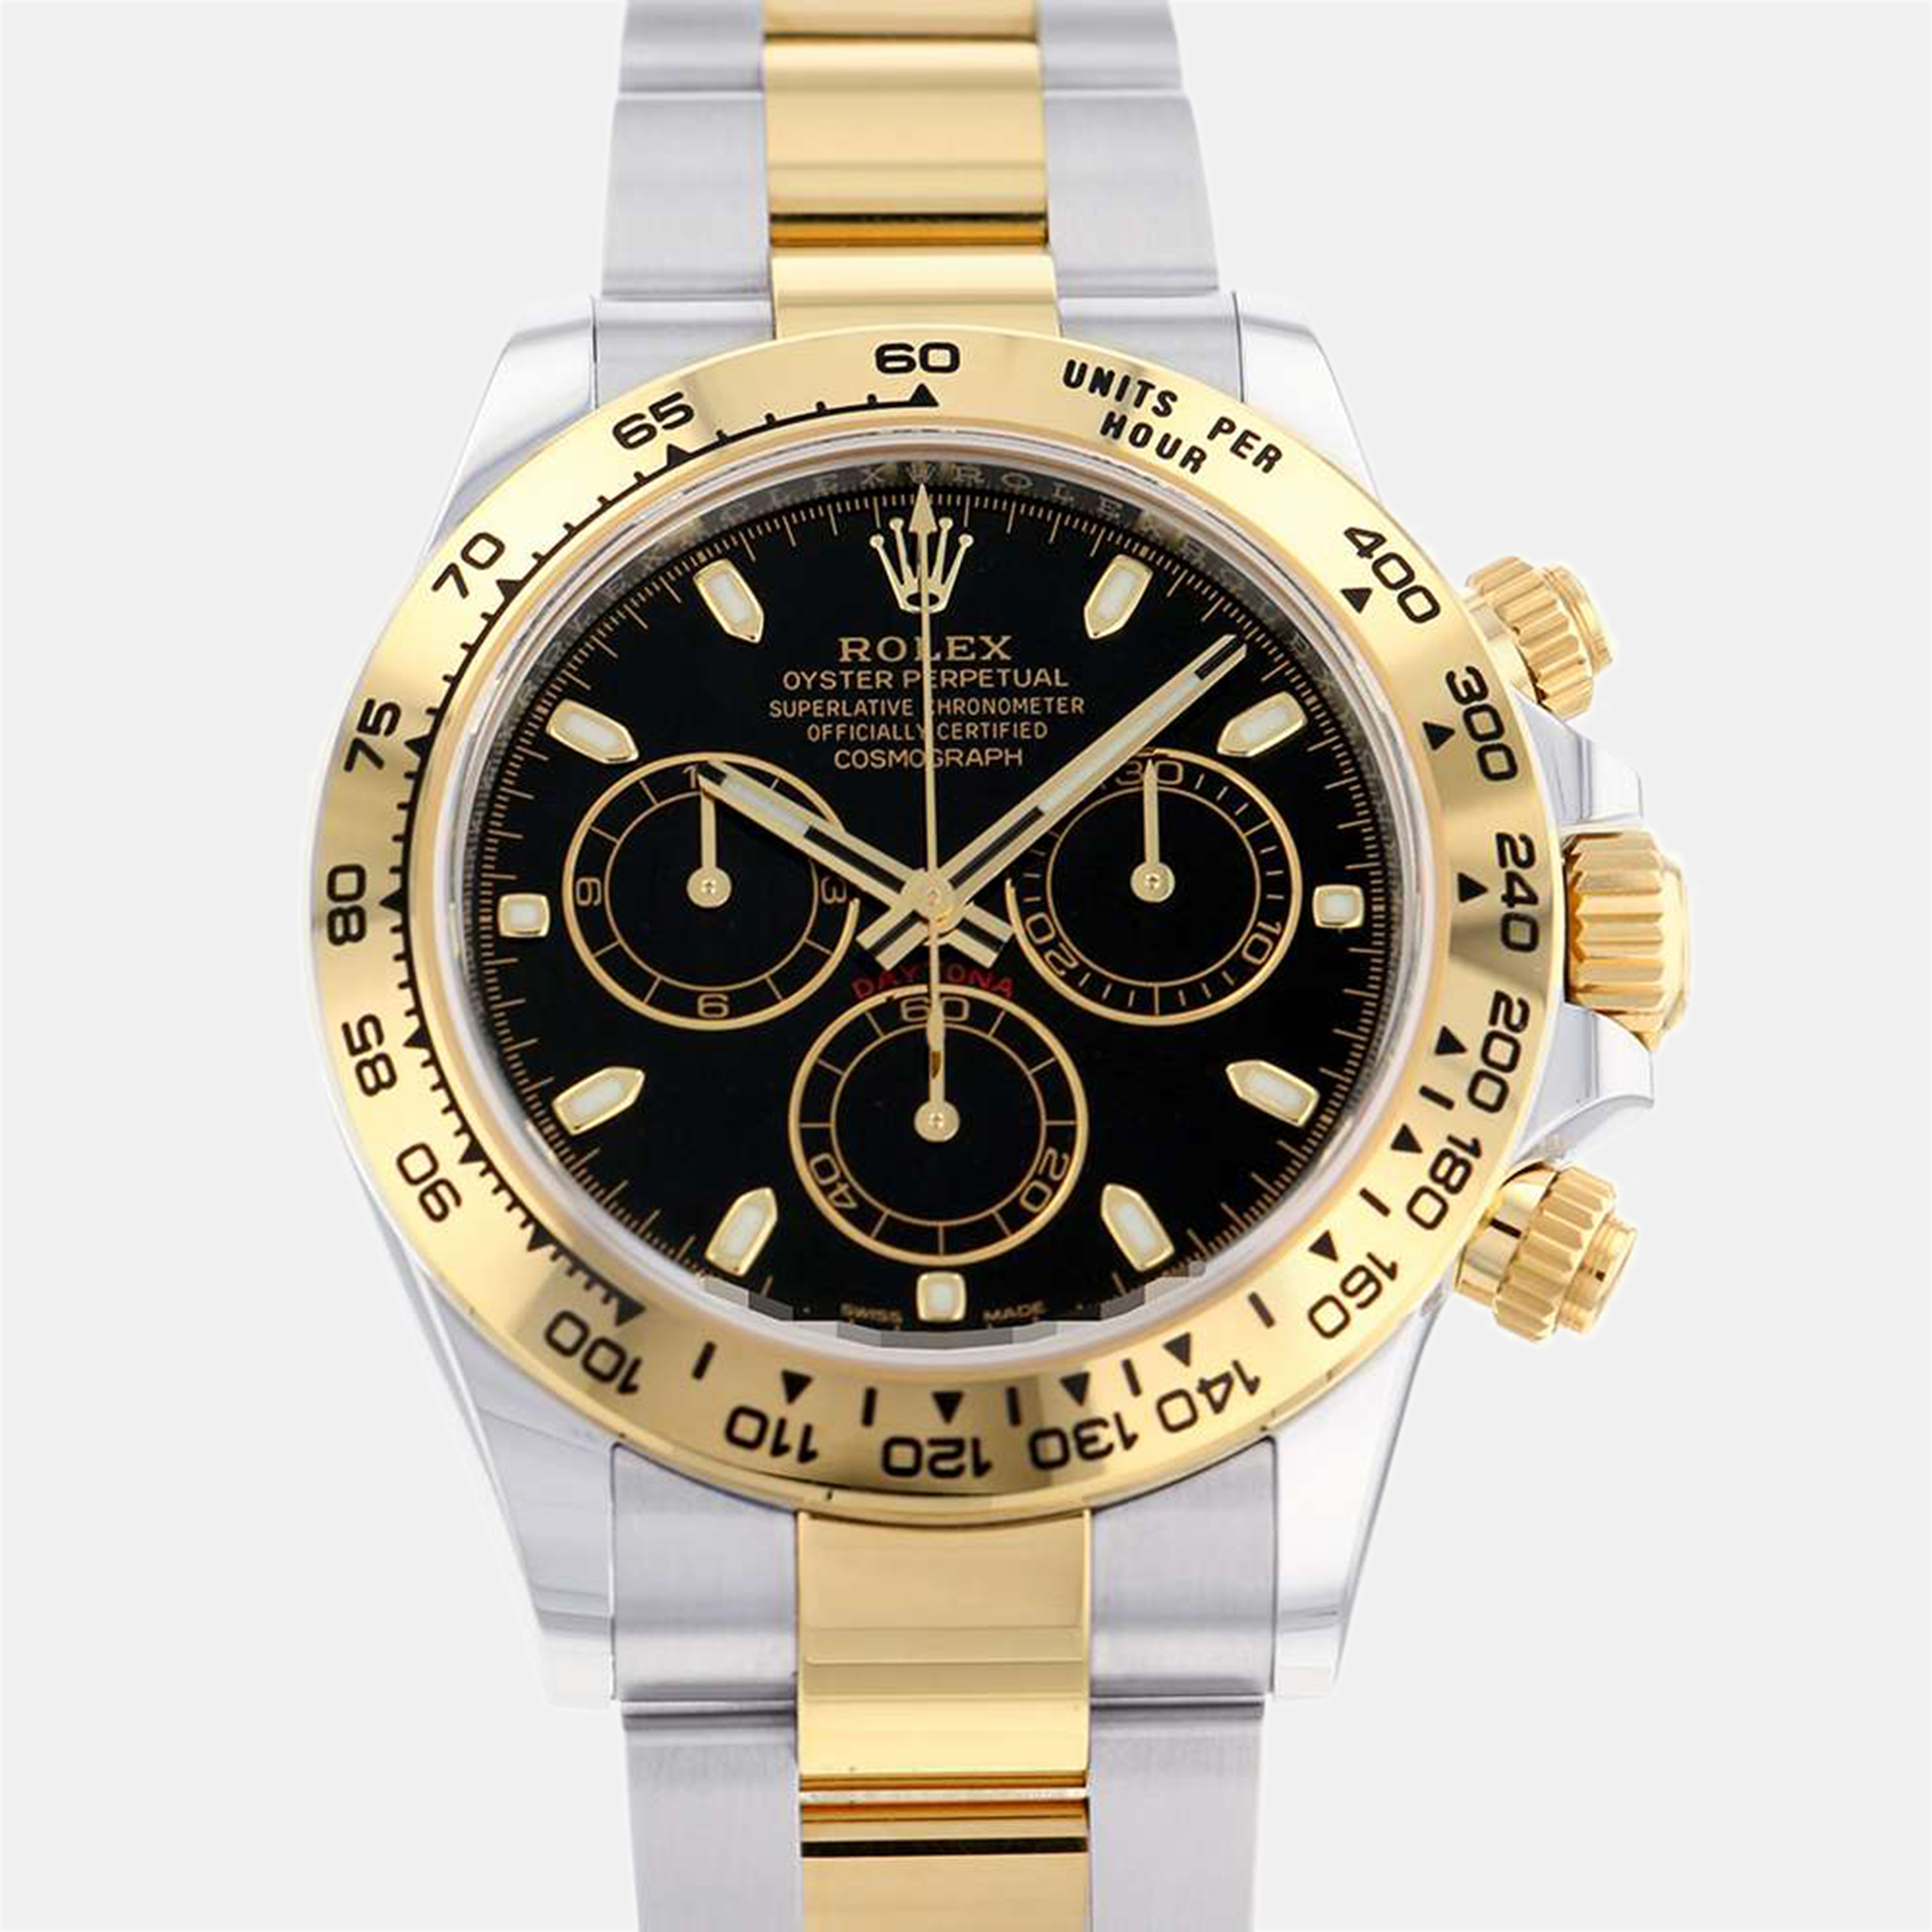 Rolex Black 18k Yellow Gold And Stainless Steel Cosmograph Daytona 116503 Automatic Men's Wristwatch 40 Mm